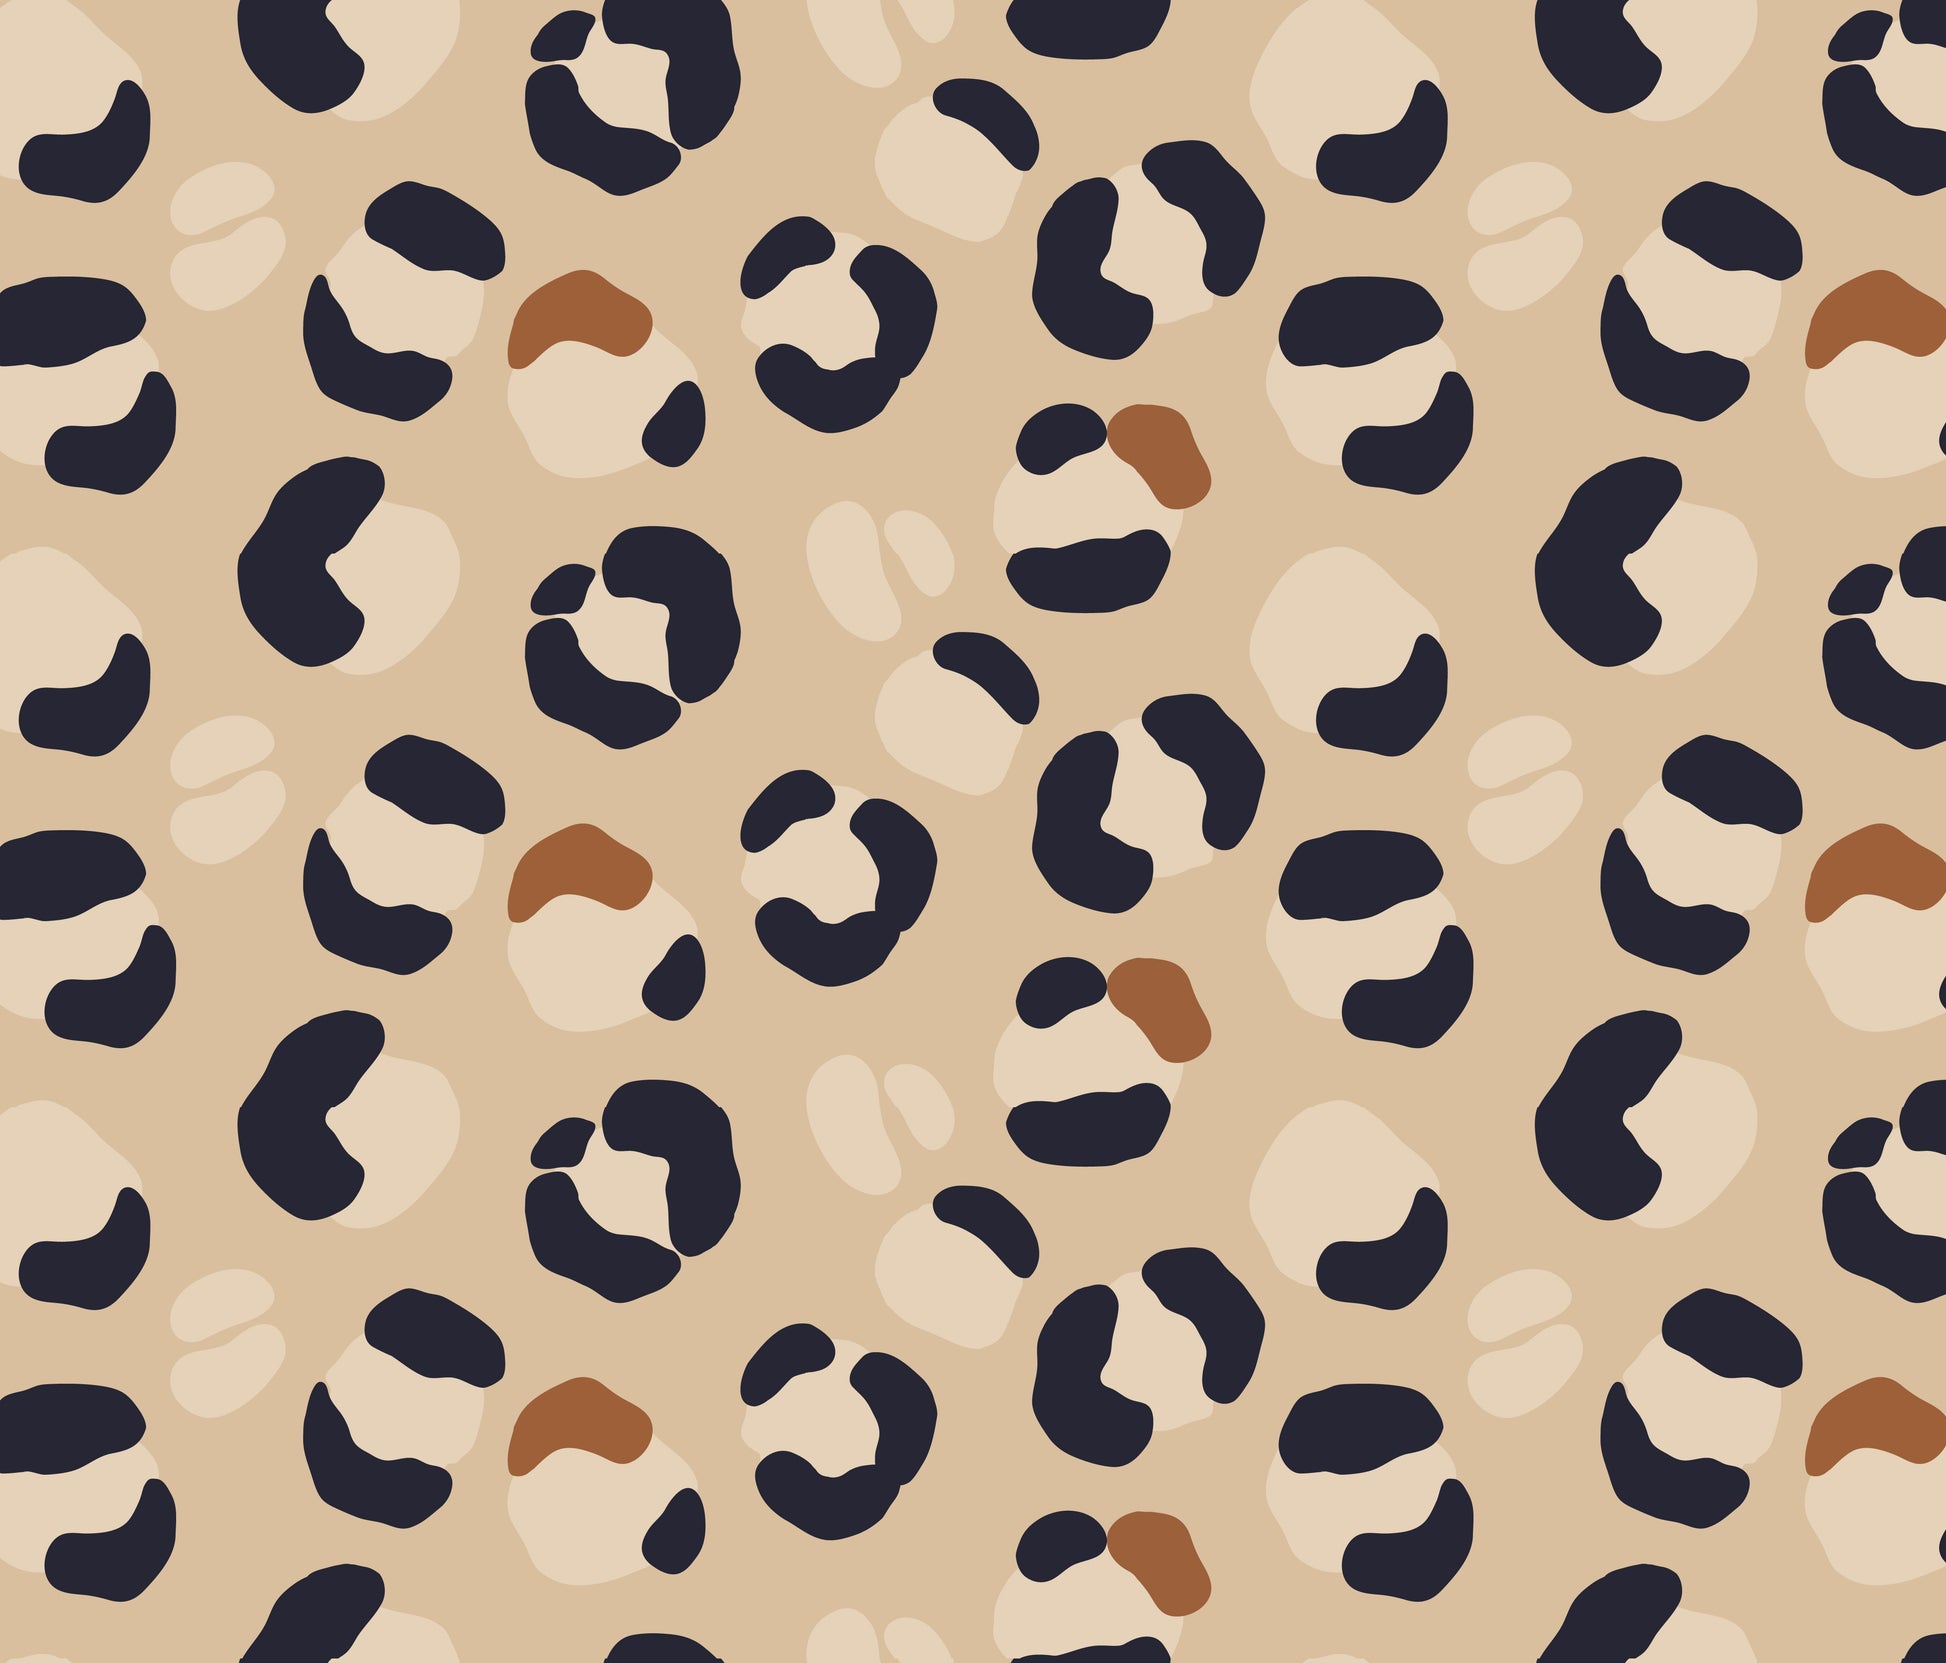 up close of the leopard print wallpaper pattern